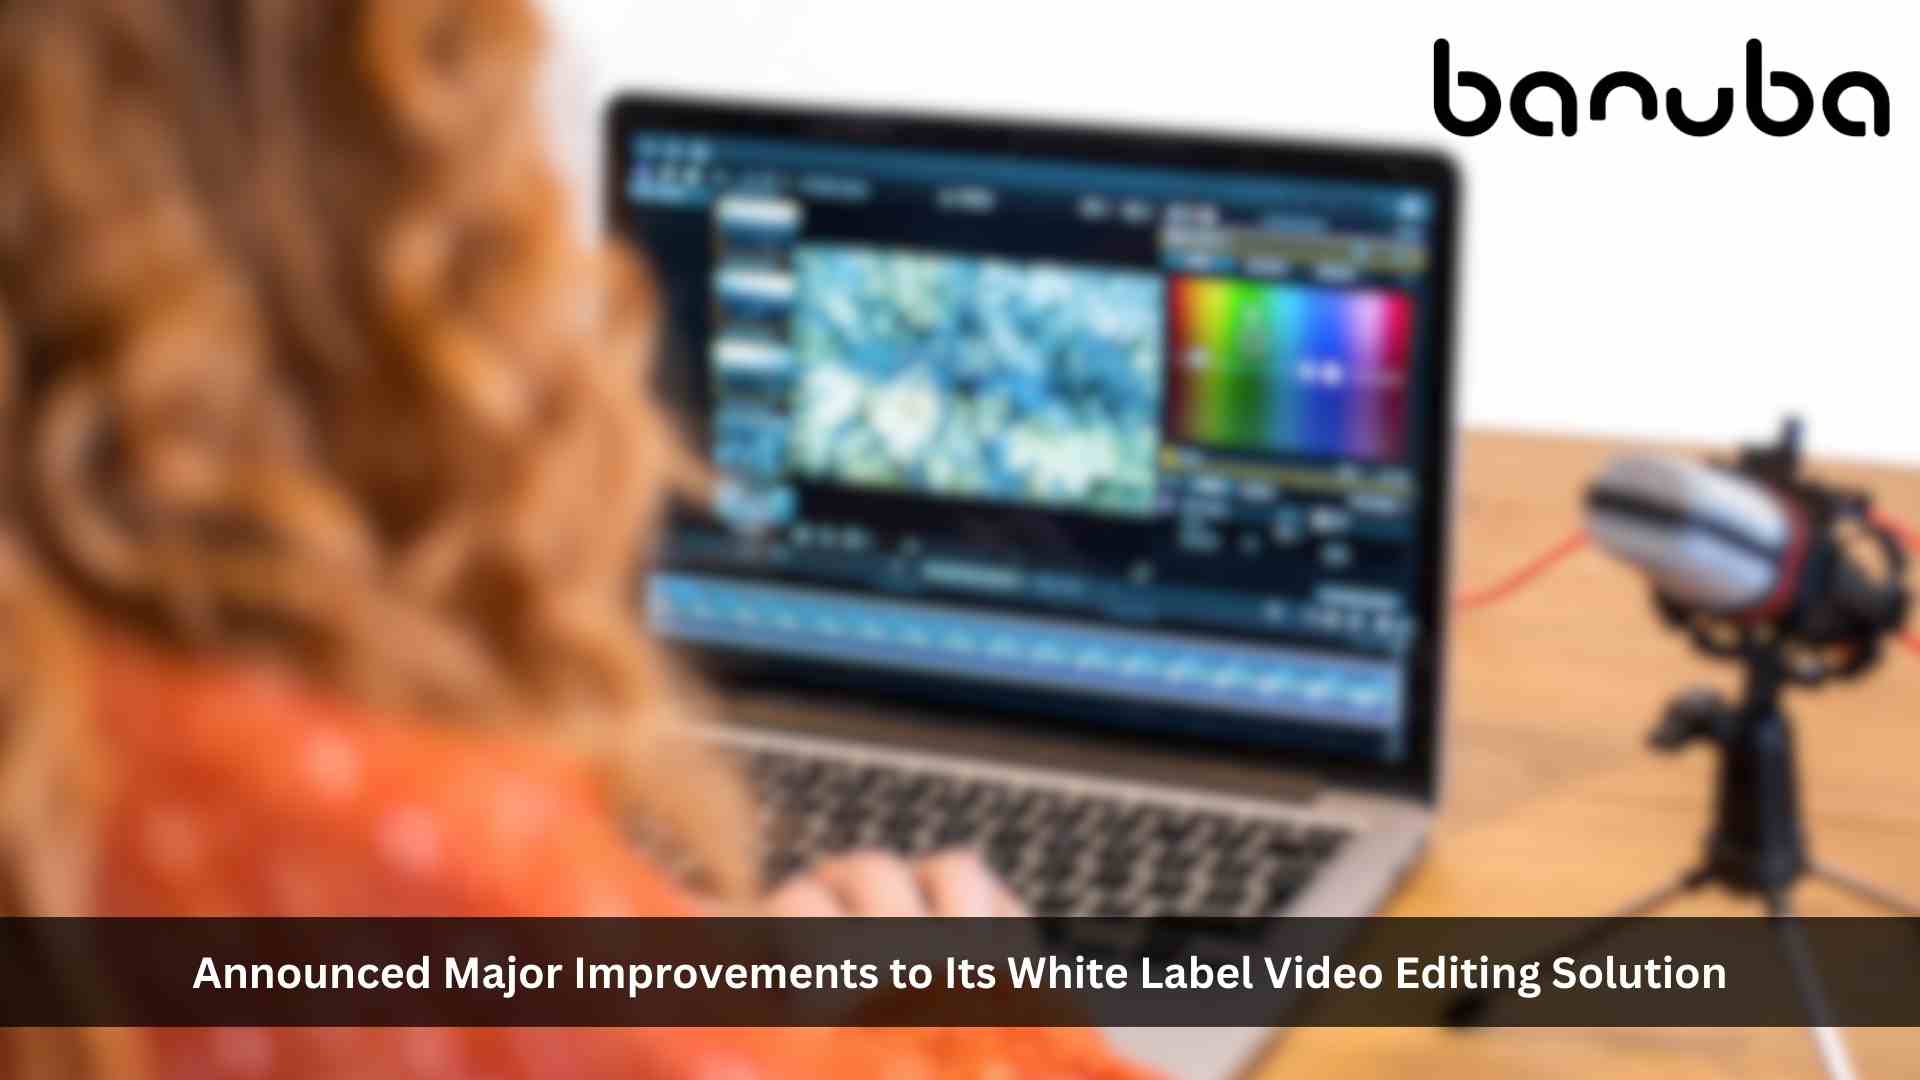 Banuba Enhances White Label Video Editing Solution with Improved UI and Seamless Integration Features